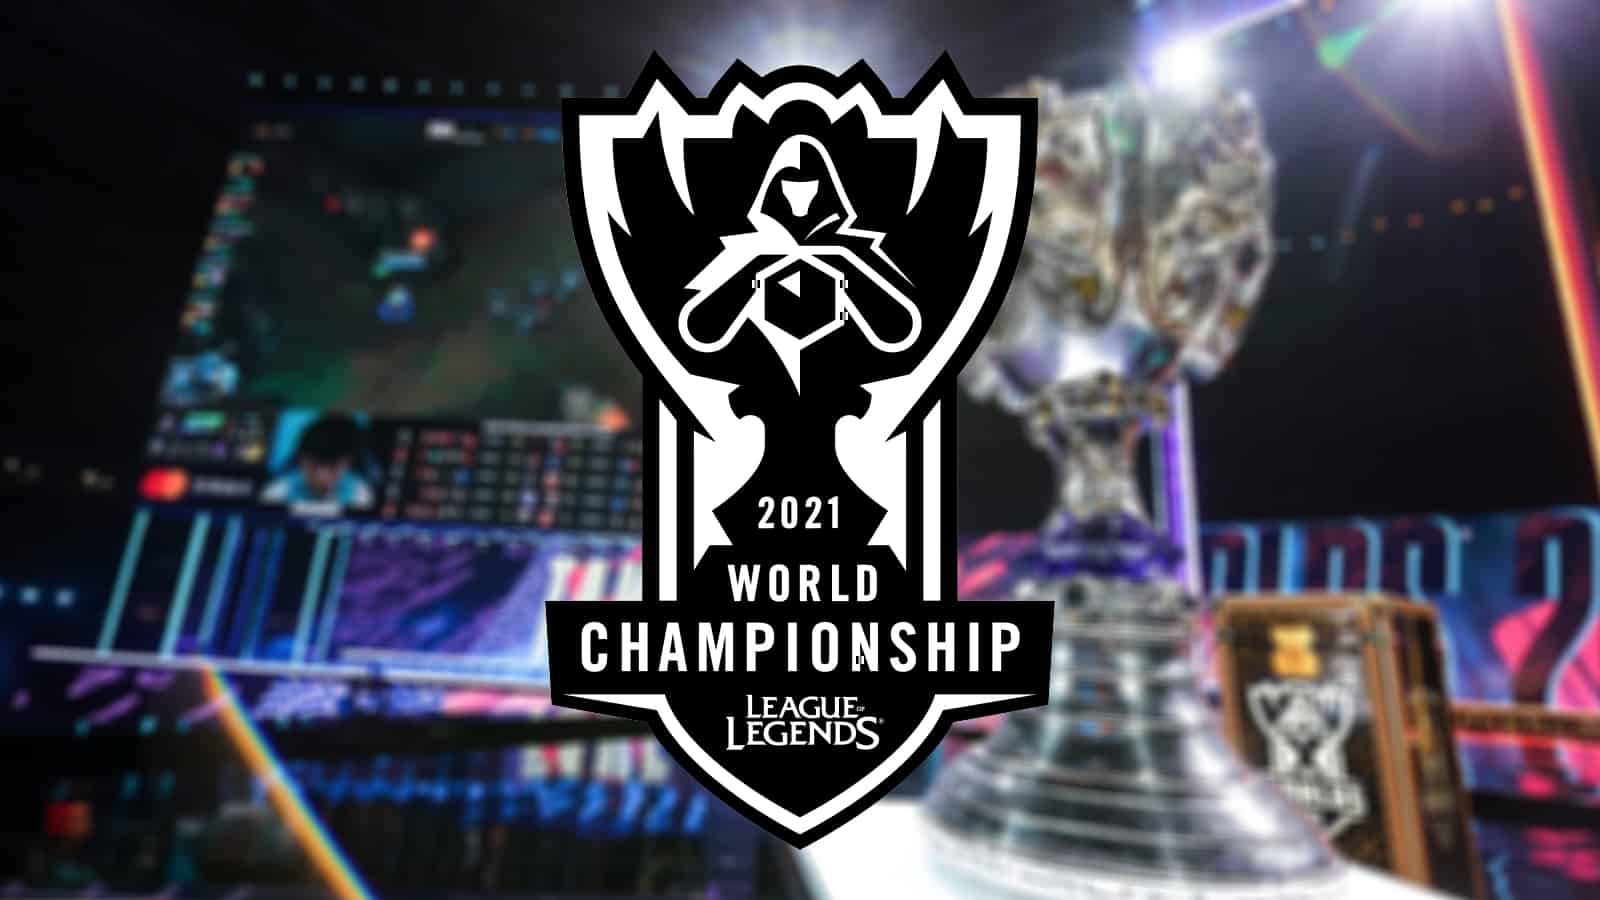 Riot Games confirms Iceland as League of Legends Worlds 2021 host - Dexerto